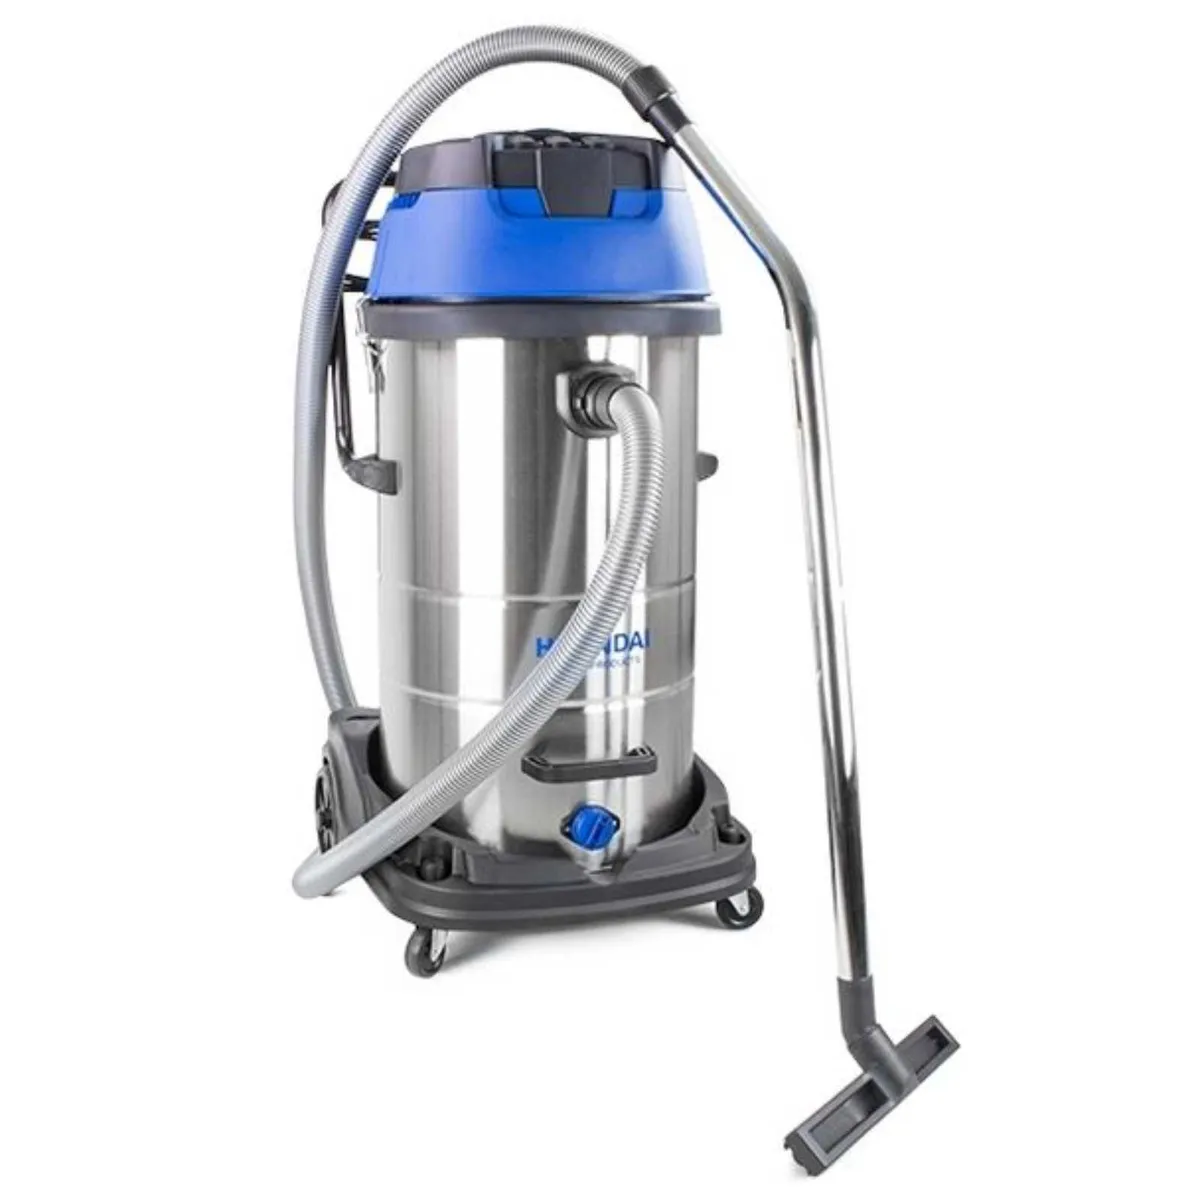 Hyundai 3000W  3-In-1 Wet And Dry Vacuum Cleaner - Image 1